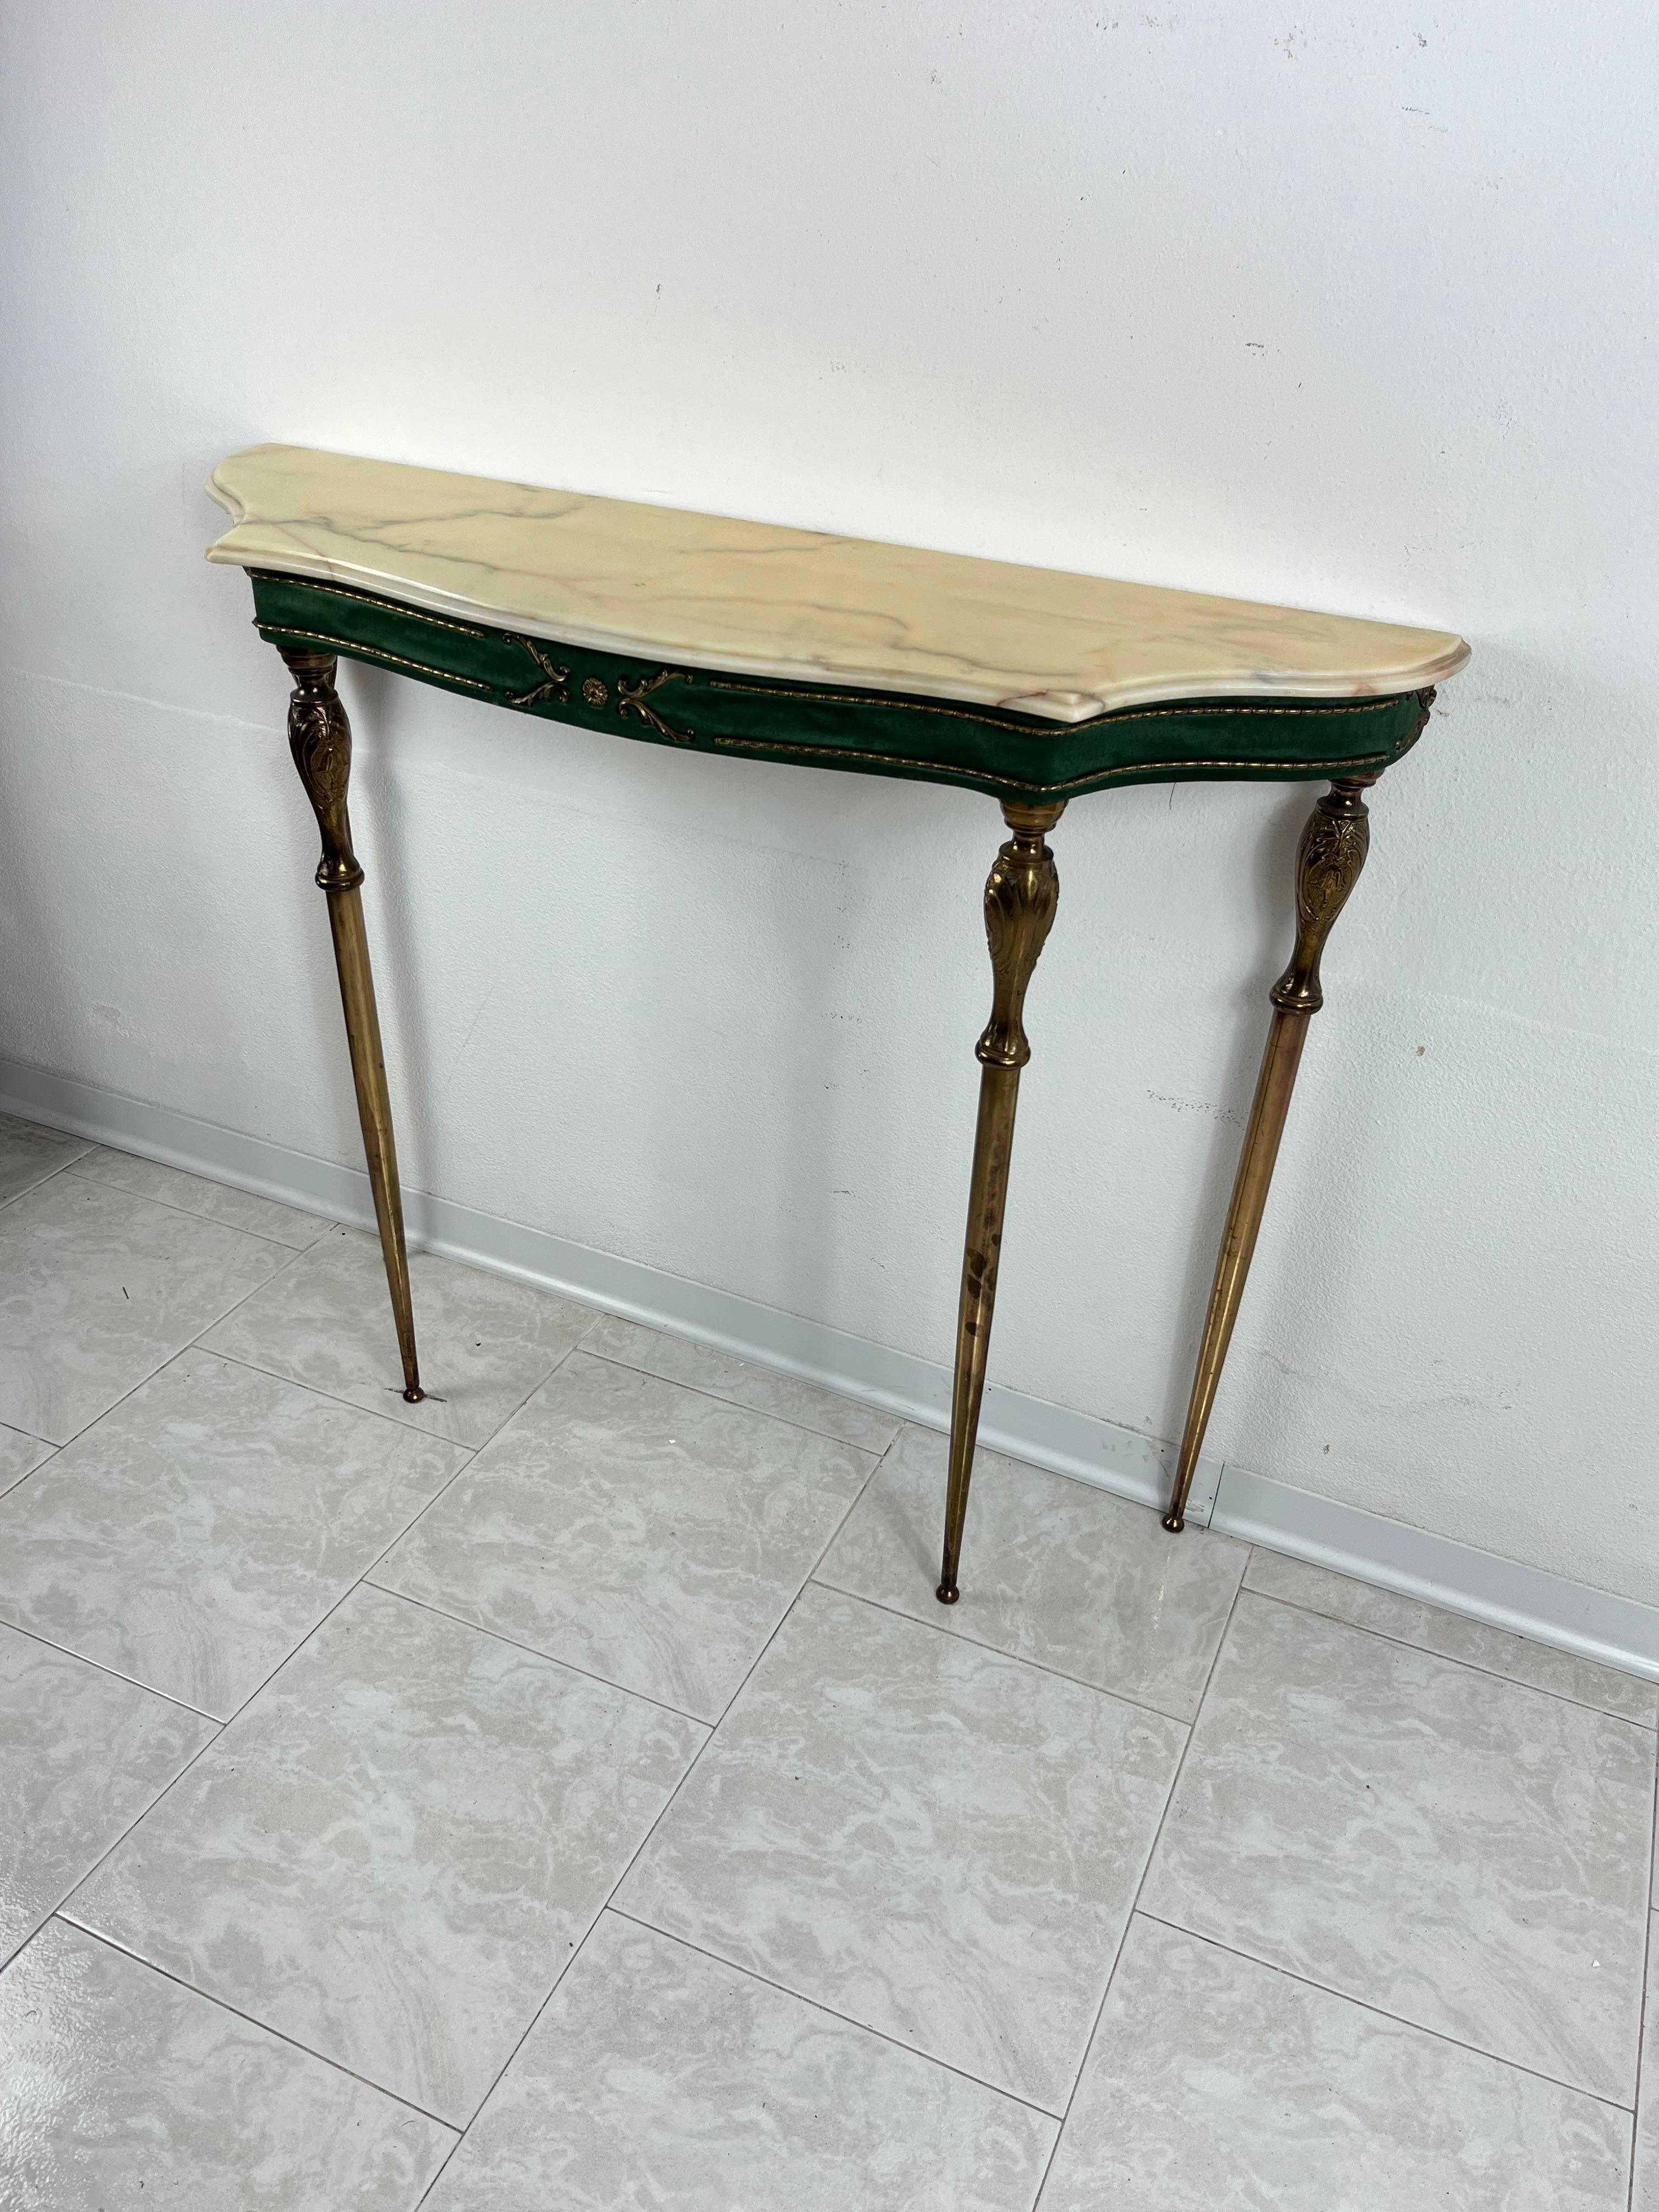 Mid-Century console and mirror attributed to Paolo Buffa 1960s
The wooden console covered in silk and brass details has a marble top and brass feet.
The mirror has an edge covered in green silk and a brass frieze in the center.
Good condition, small